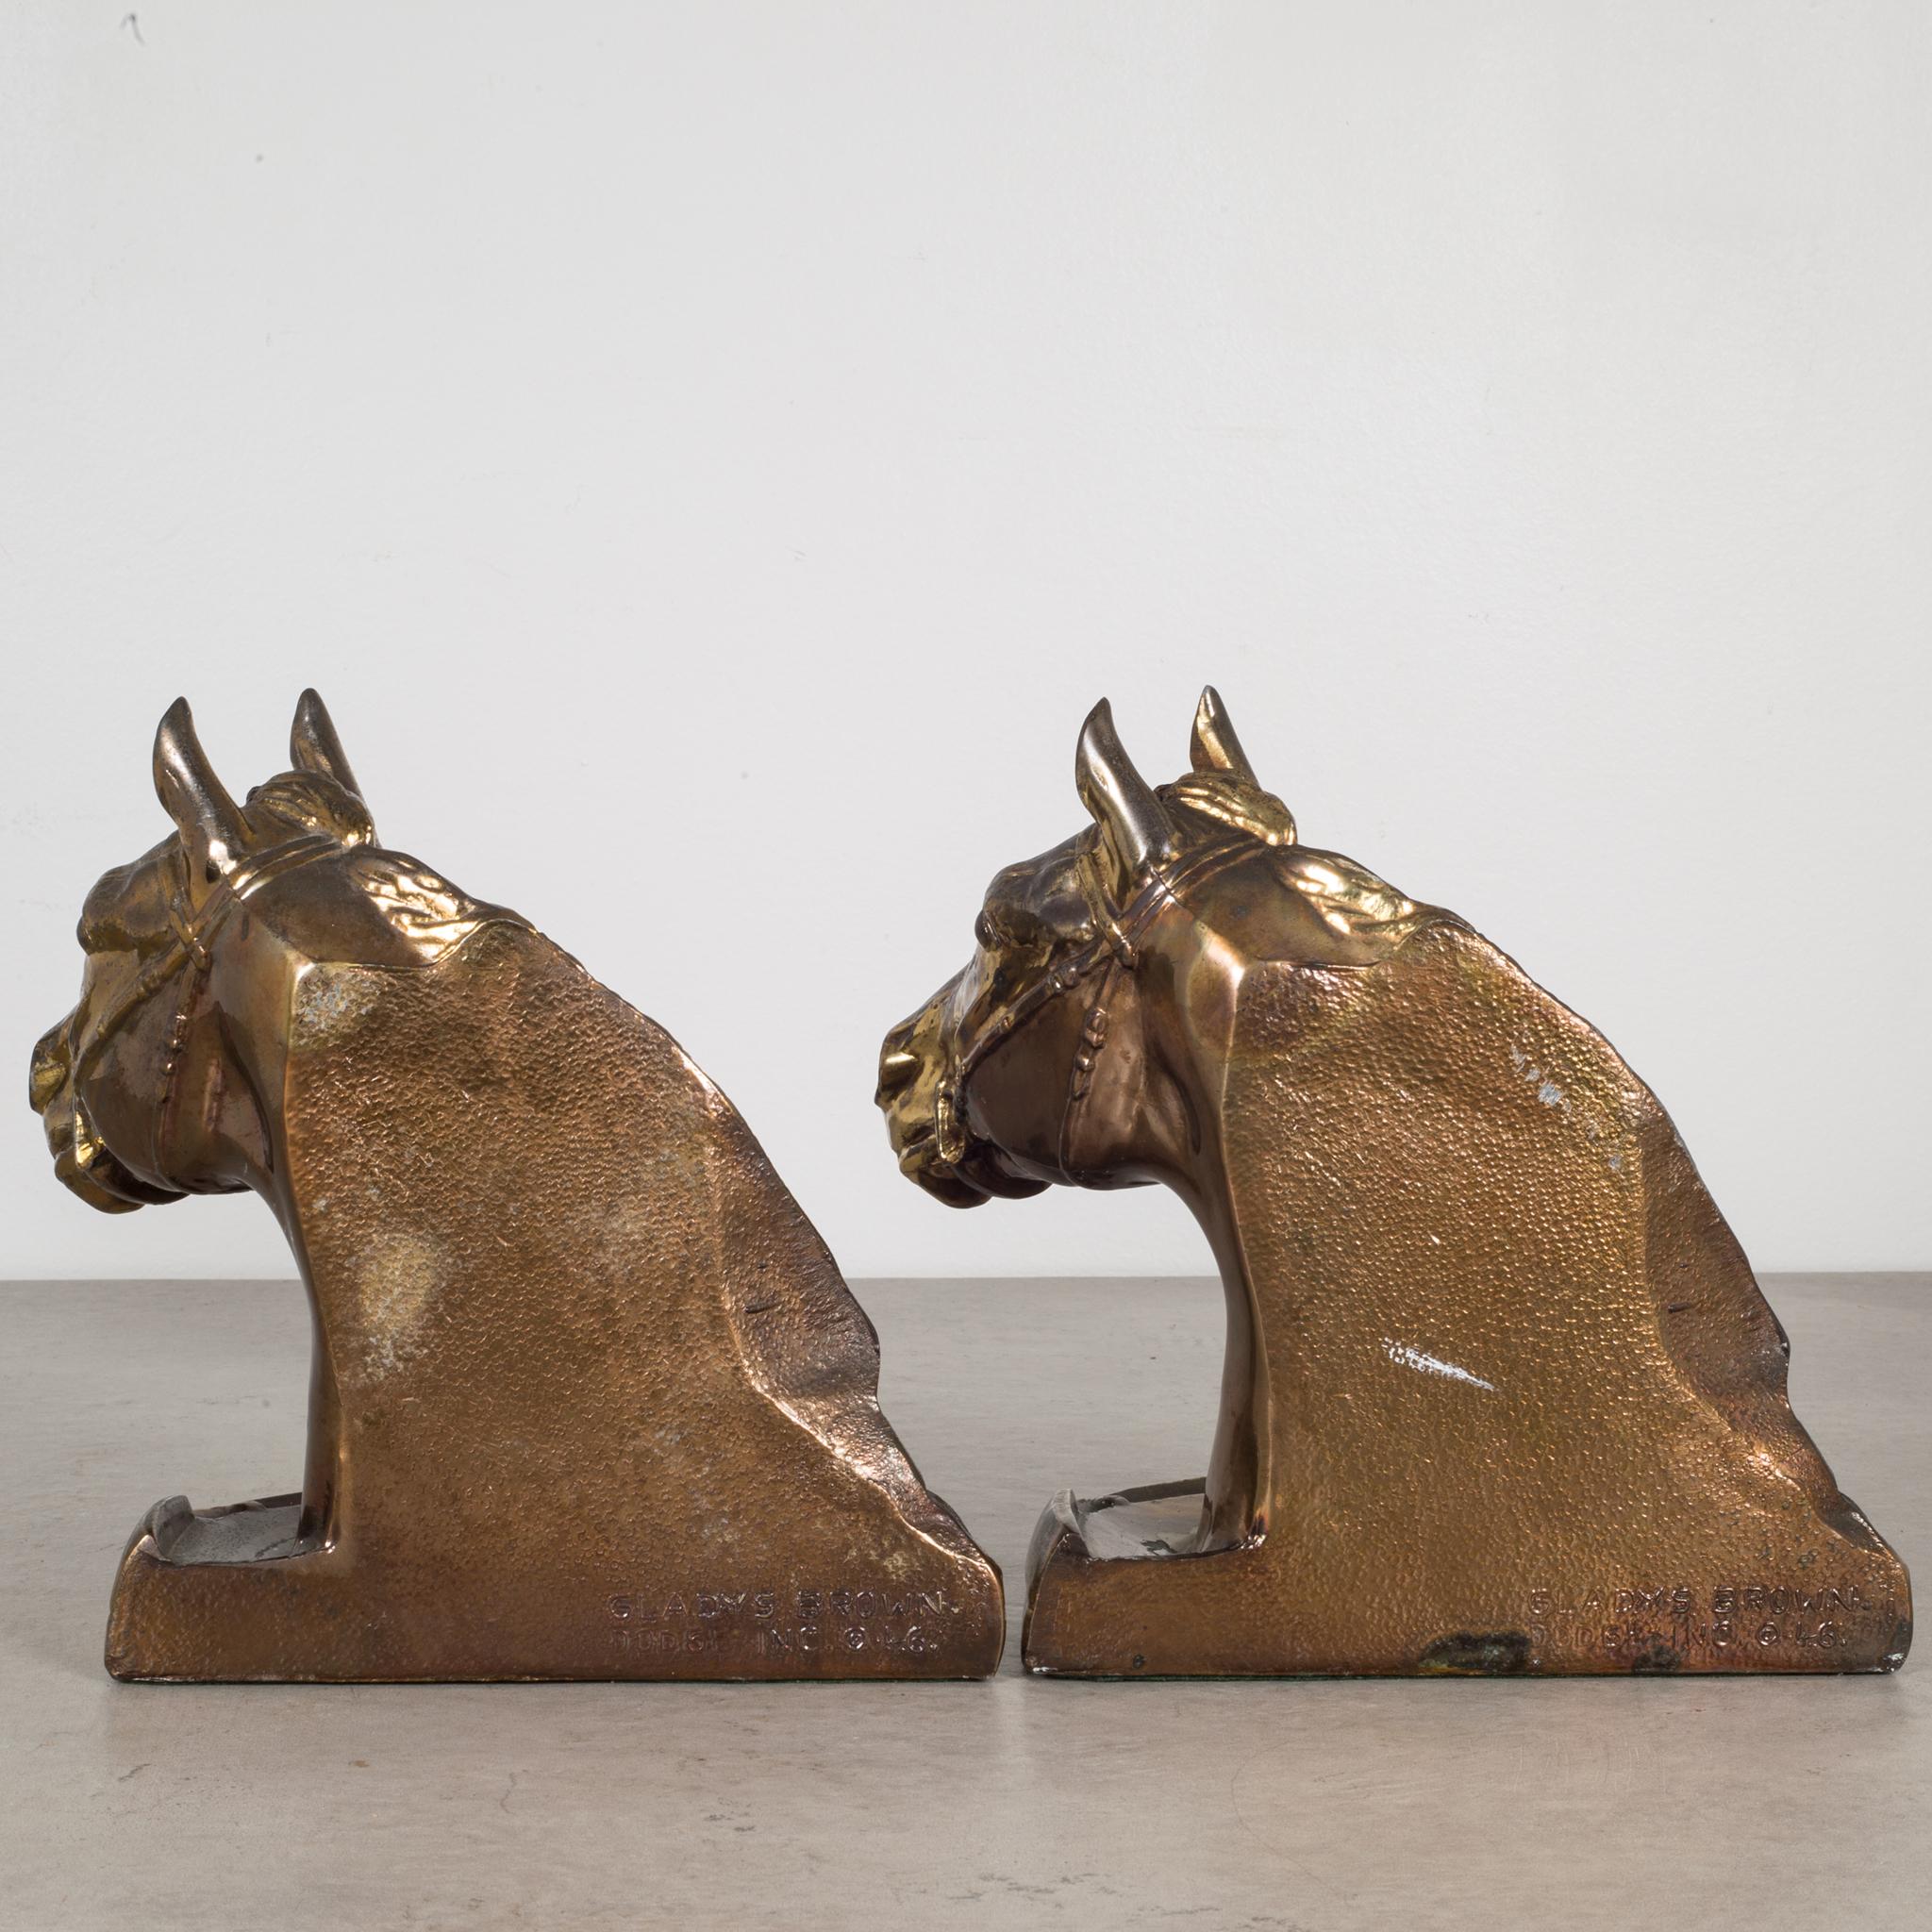 American Bronze Plated Horse Head Bookends by Glady's Brown and Dodge, circa 1930